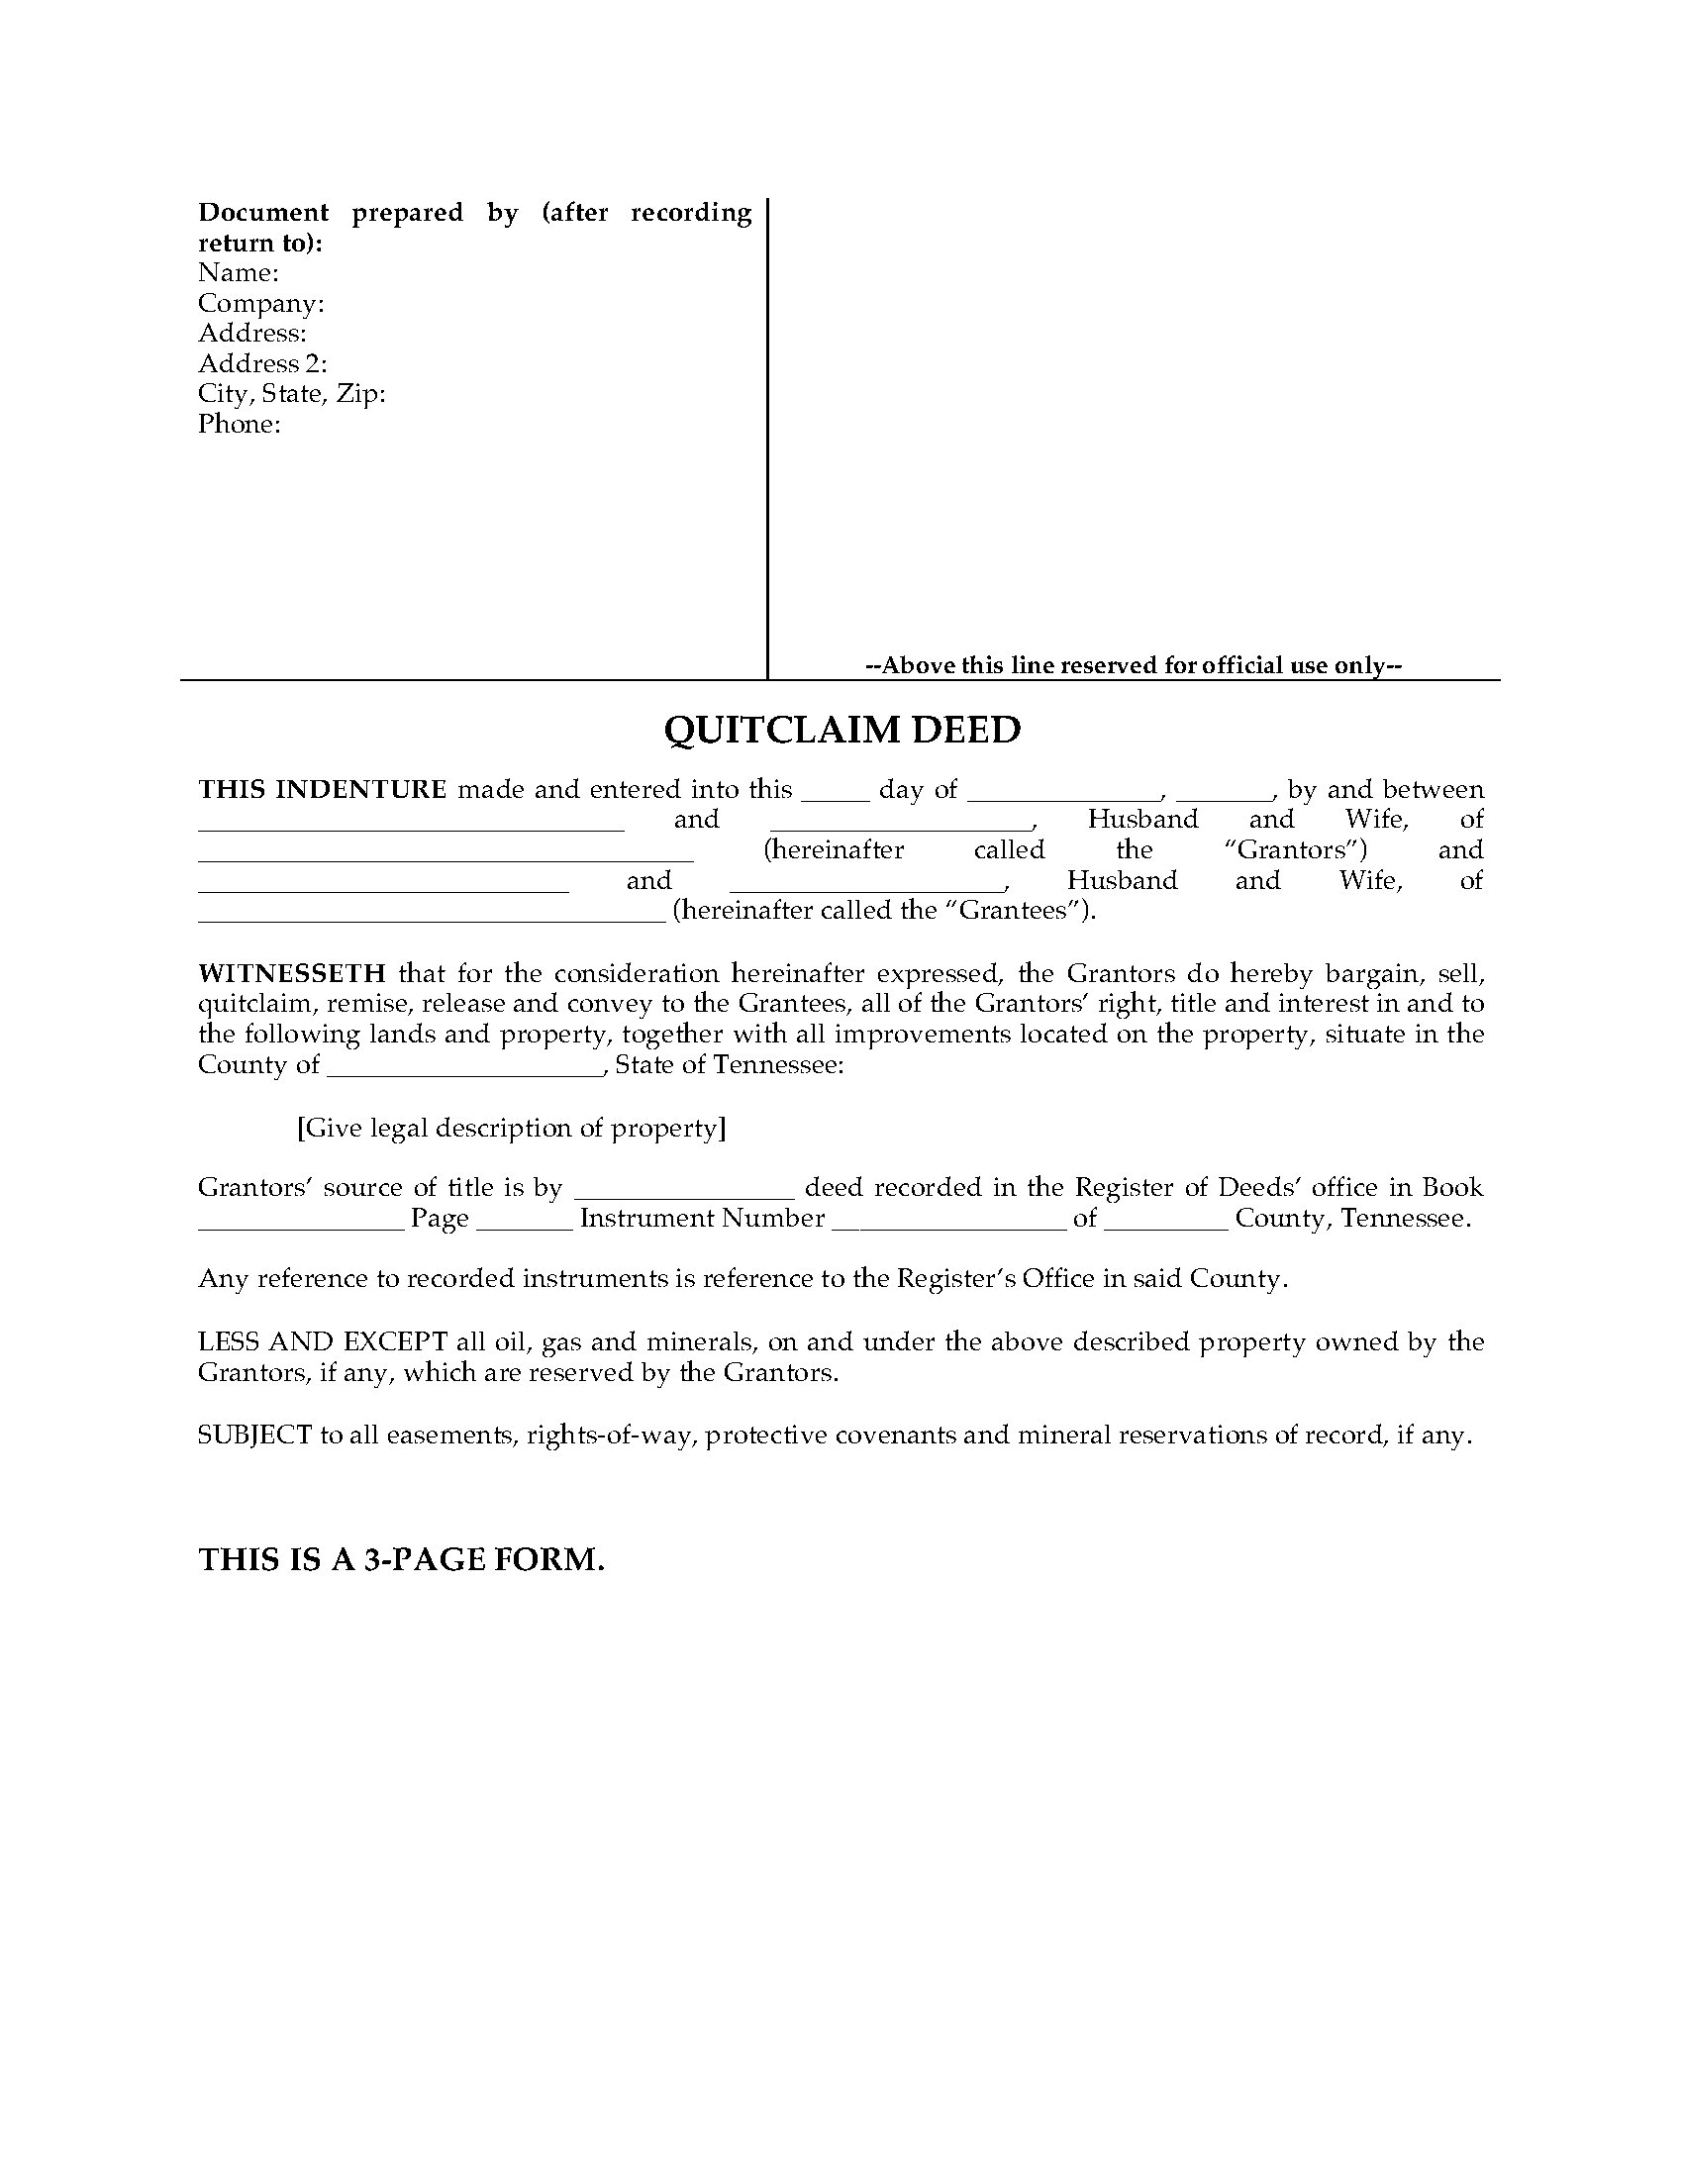 Tennessee Quitclaim Deed For Joint Ownership | Legal Forms And Business With Regard To Joint Property Ownership Agreement Template